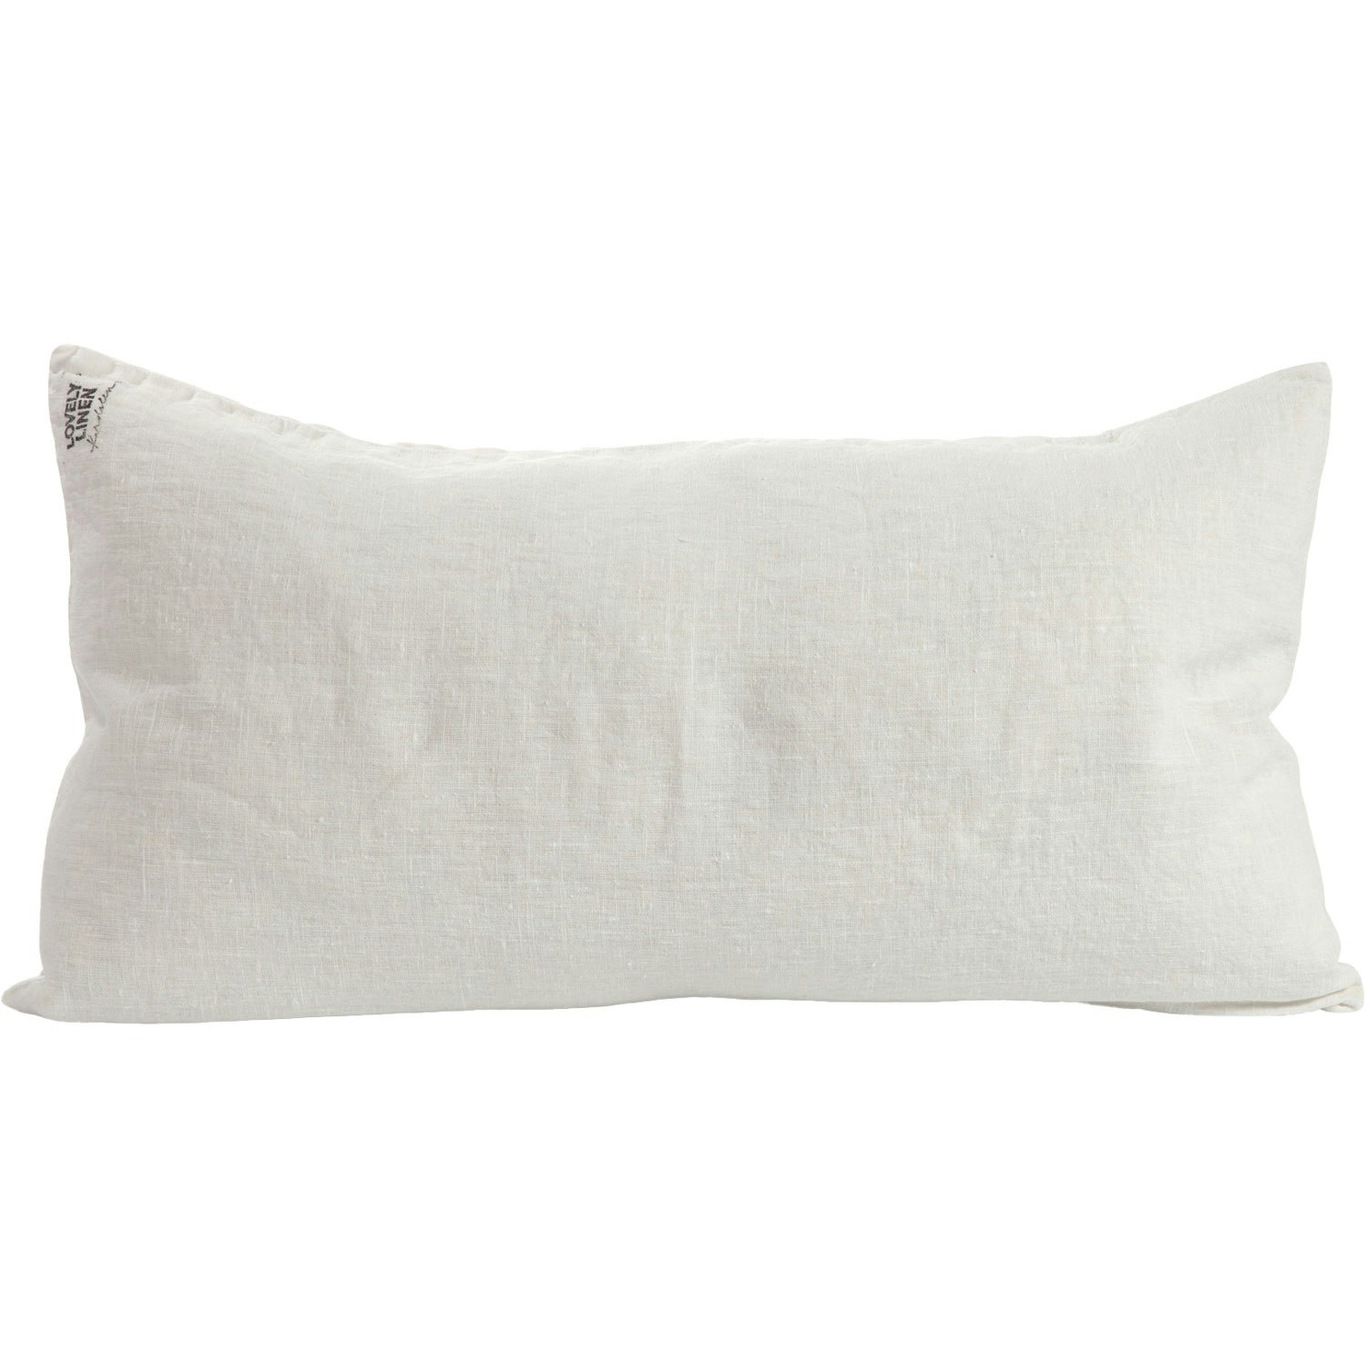 Lovely Cushion Cover 40x70 cm, Off-white